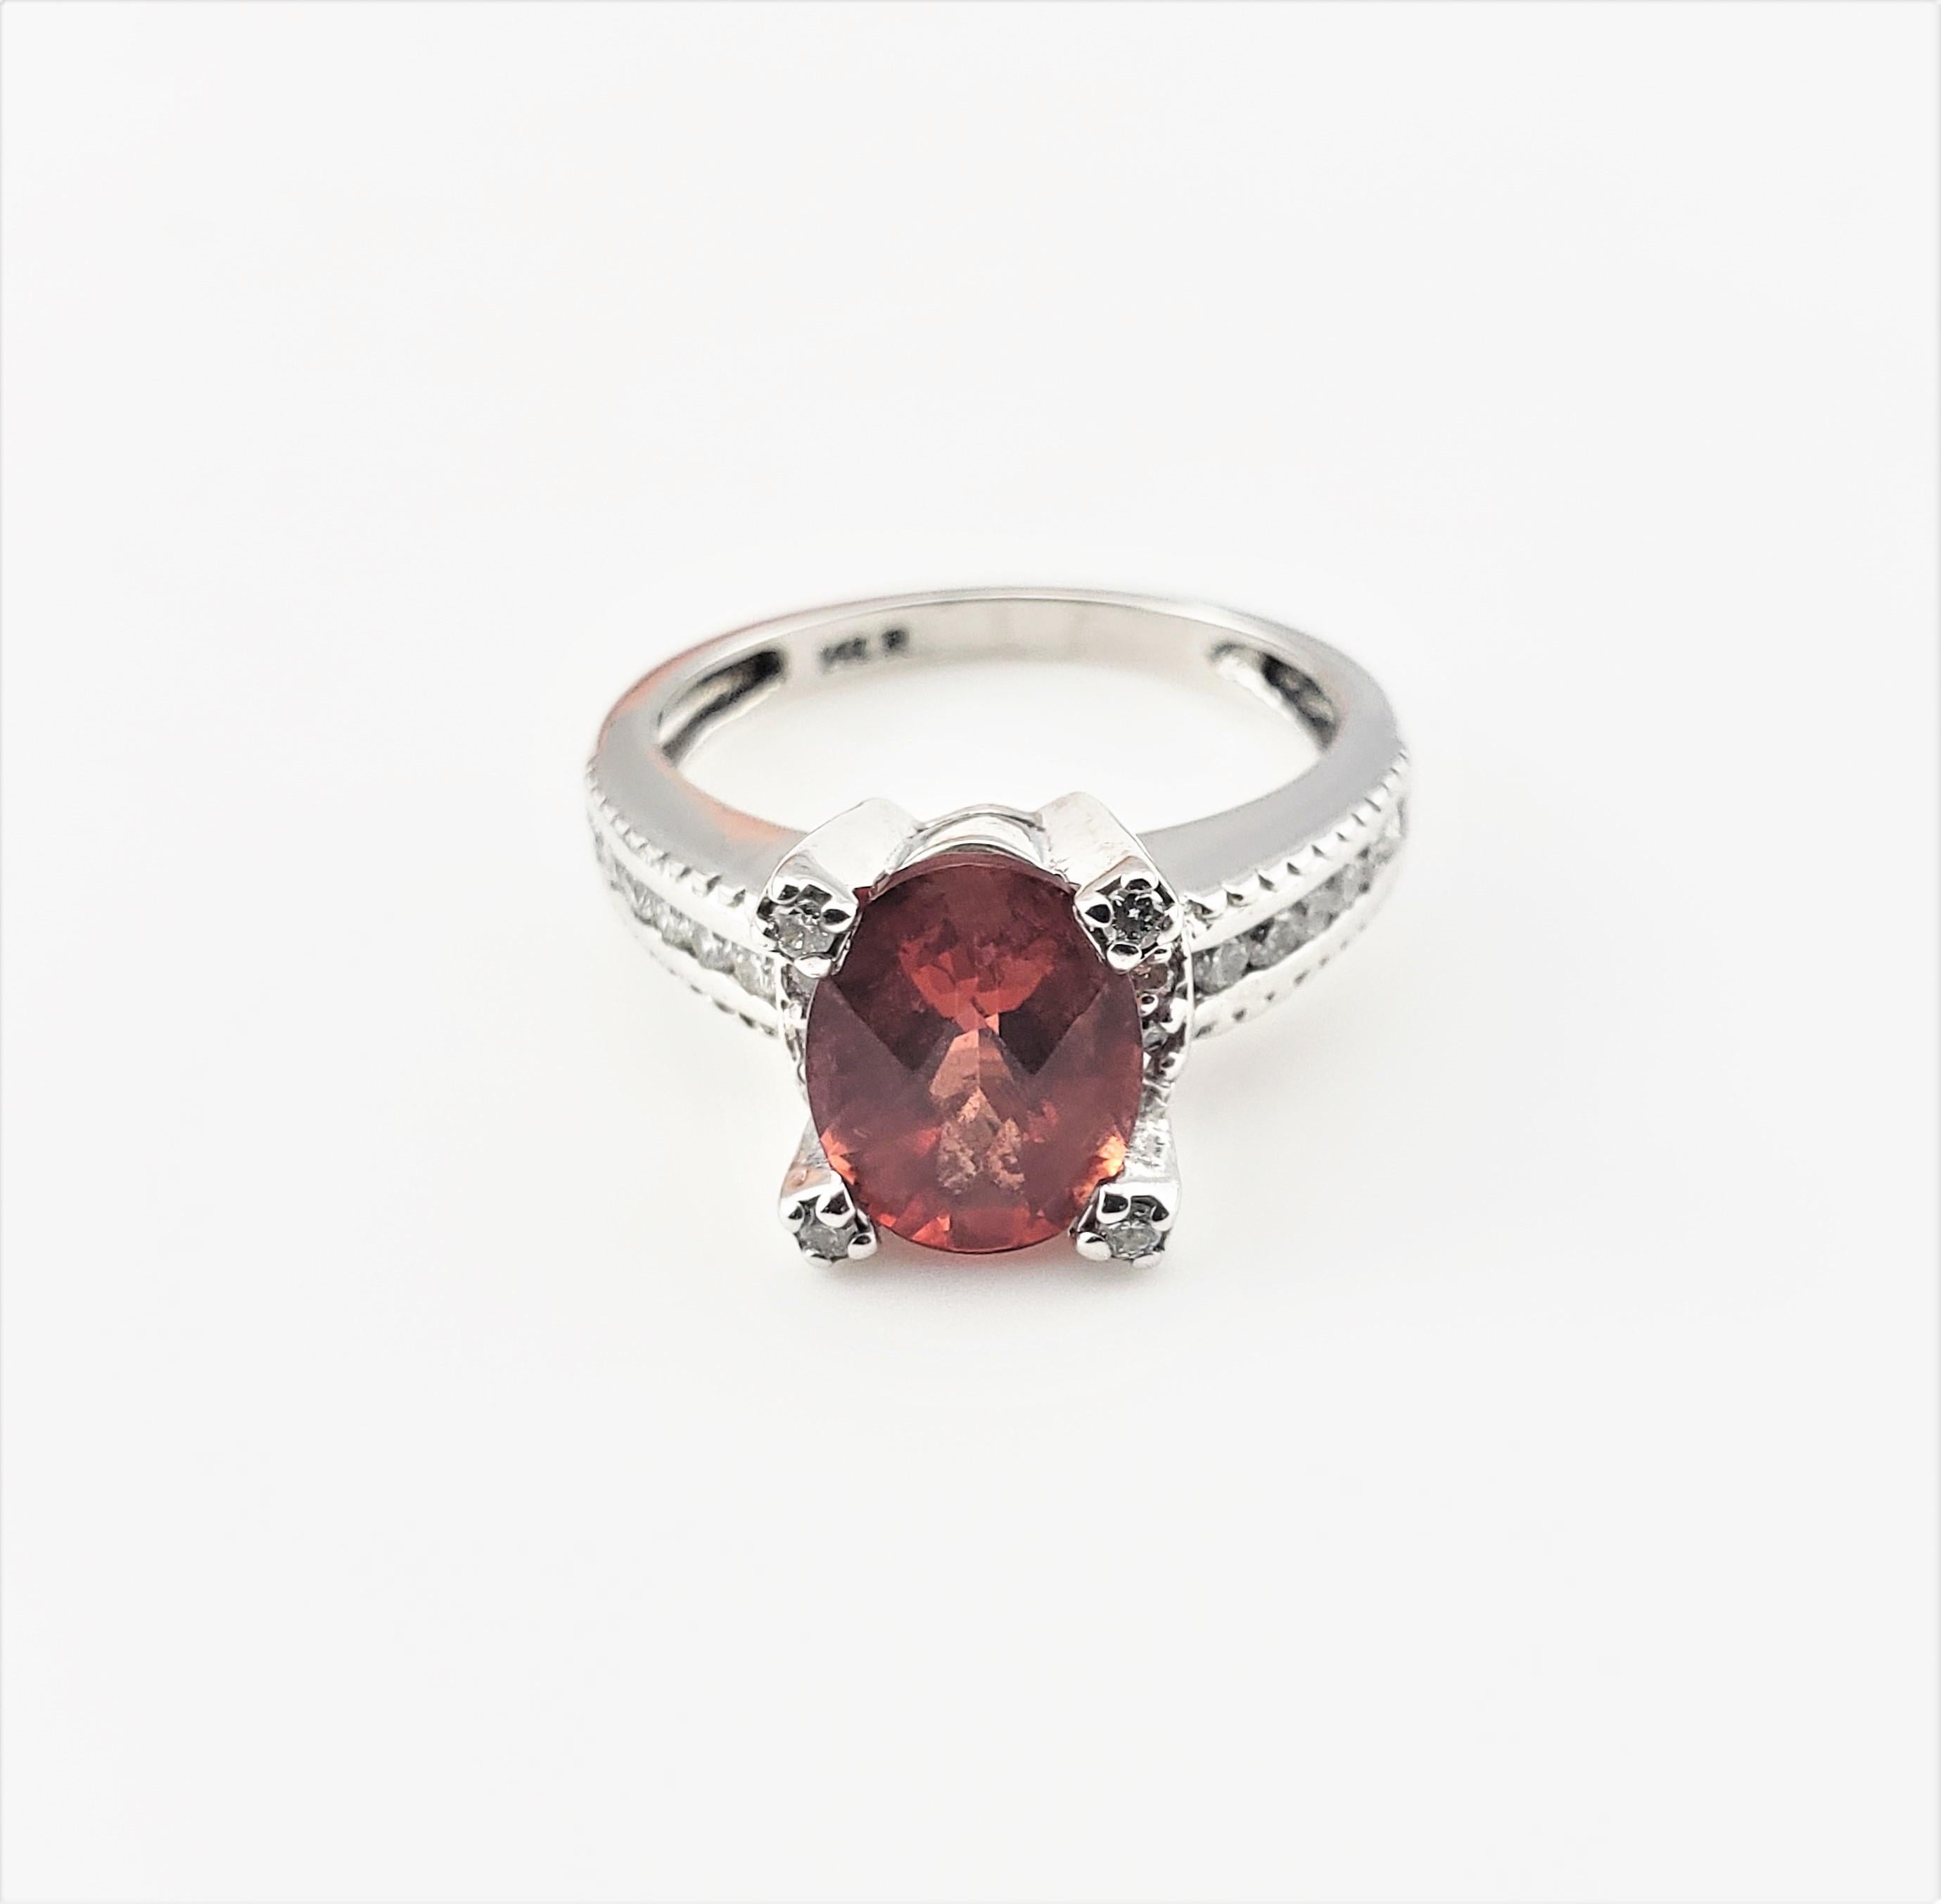 14 Karat White Gold Garnet and Diamond Ring Size 5.5  GAI Certified-

This lovely ring features one cushion rose cut garnet (2.05 ct.) and 20 round brilliant cut diamonds set in beautifully detailed 14K white gold.  Top of ring measures 9 mm x 9 mm.